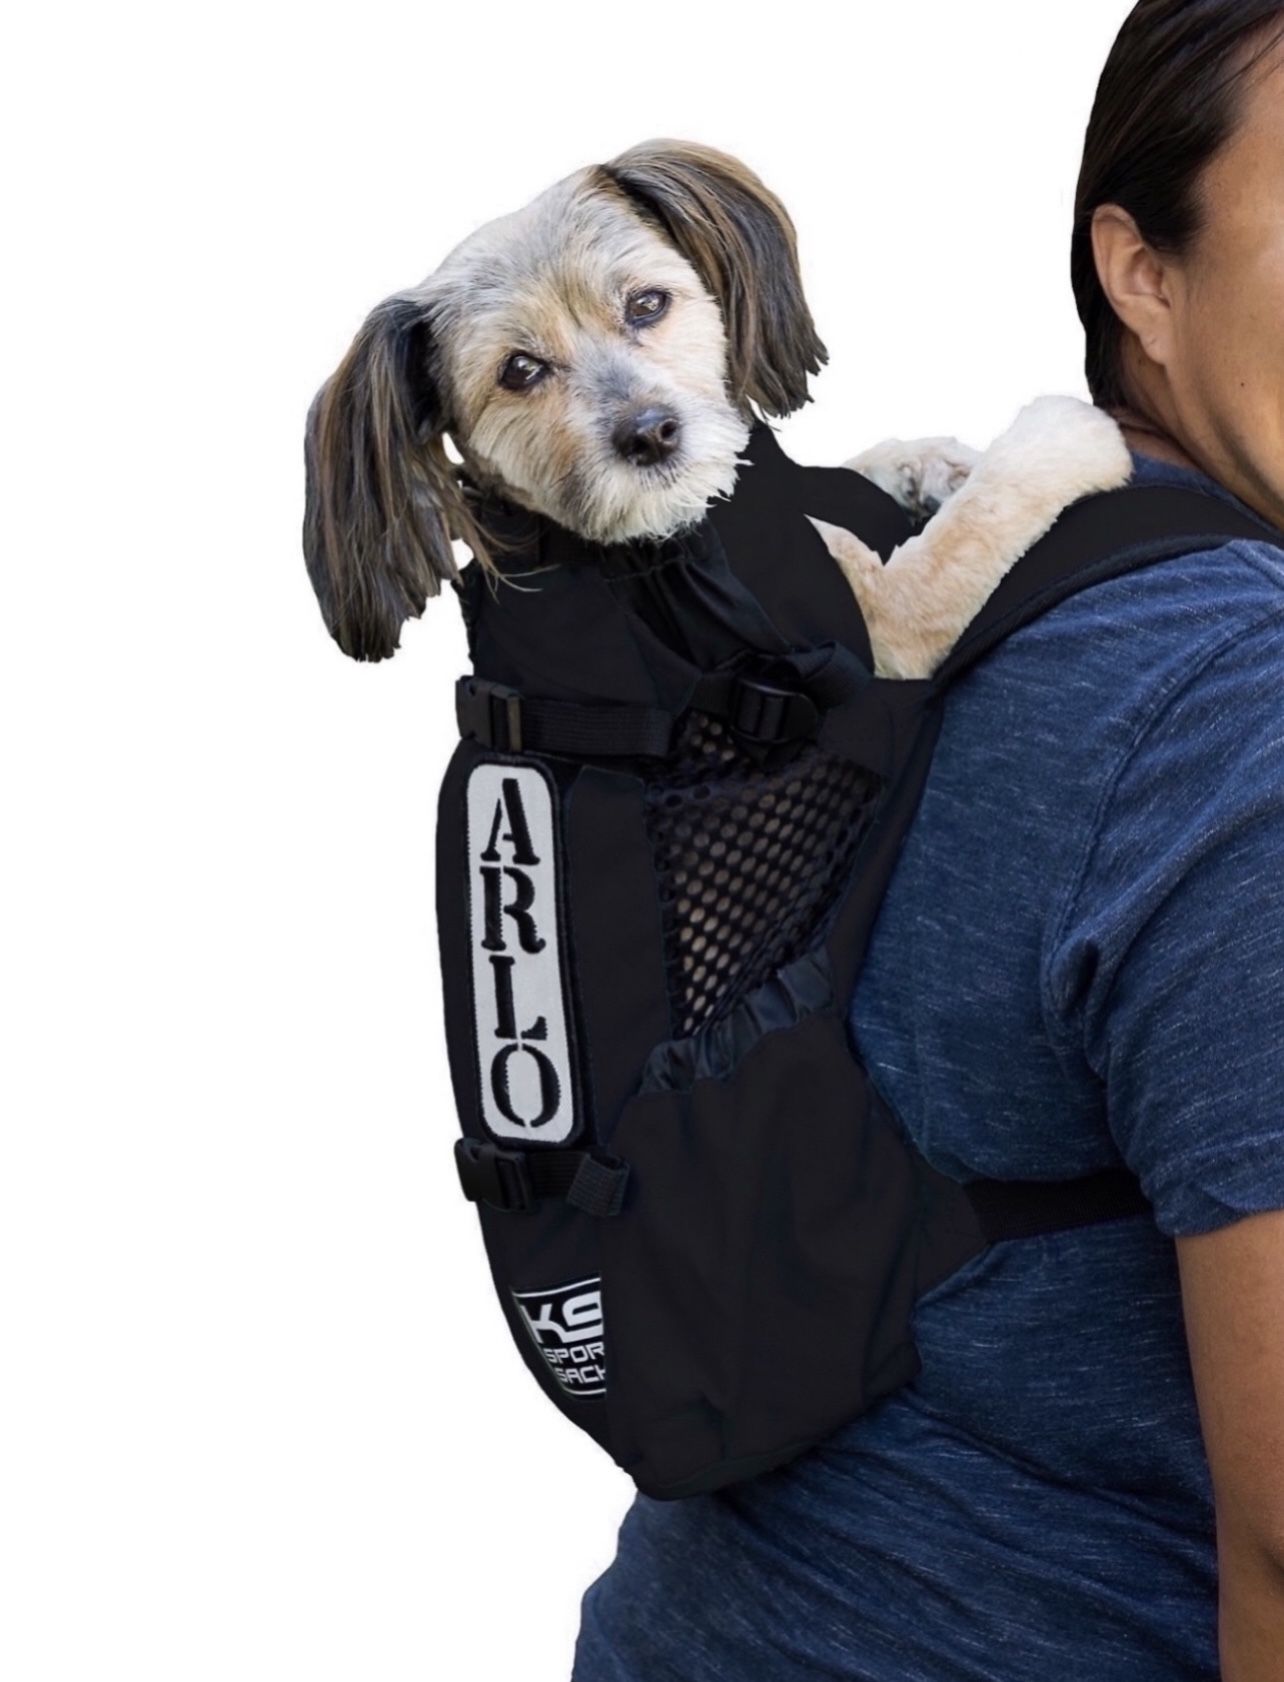 K9 Sport Sack Air 2 Forward Facing Dog Carrier Backpack, Jet balck, Small My Price Is Firm